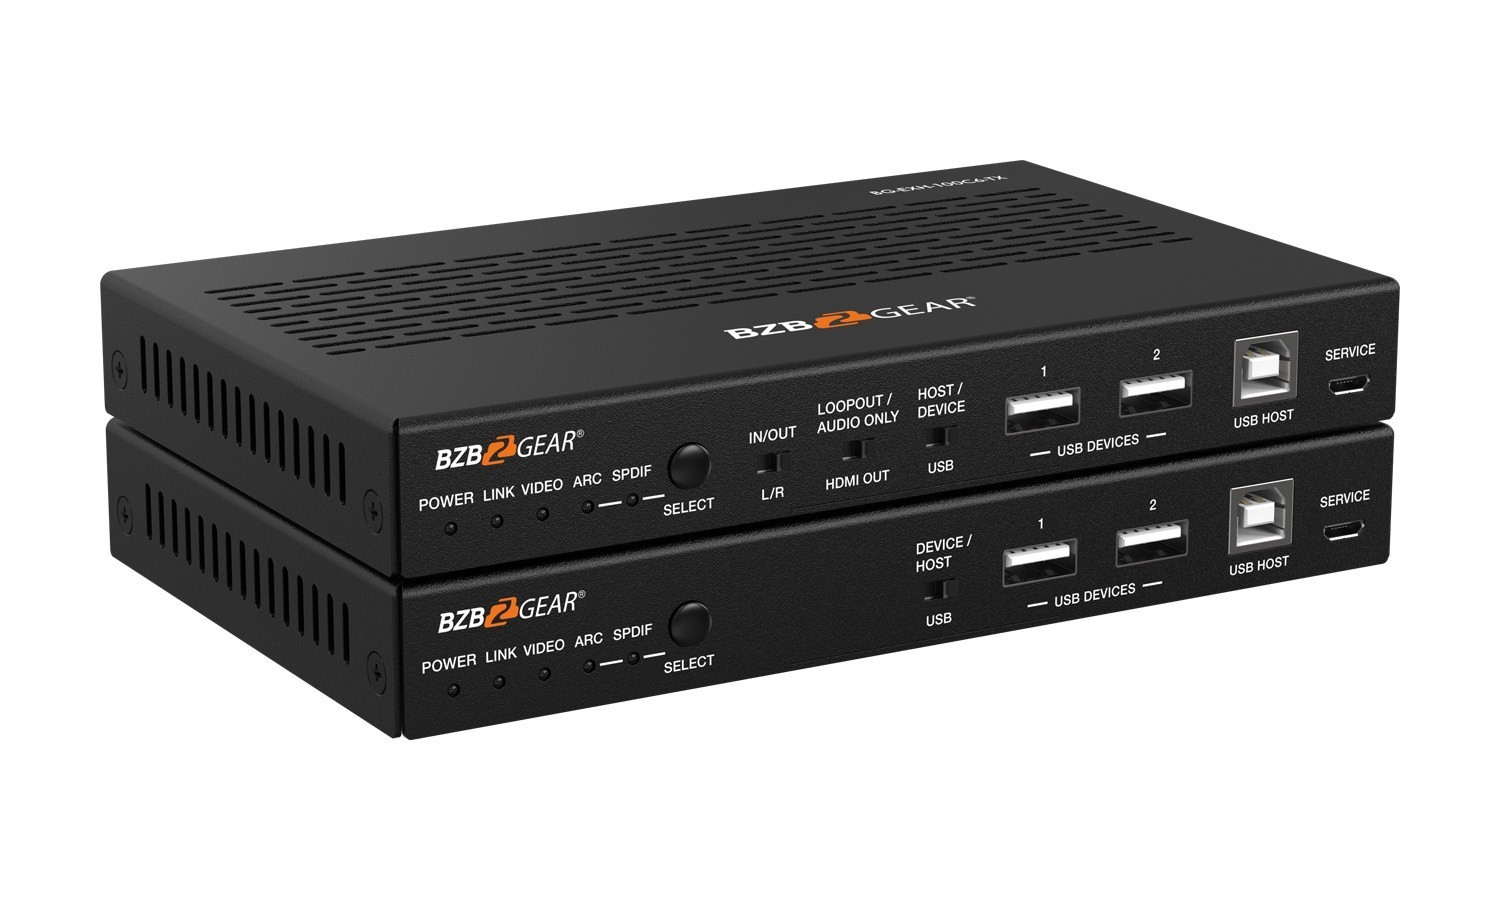 BZBGEAR BG-EXH-100C6 4K 18Gbps UHD HDMI HDBaseT 3.0 Extender Over Category 6/7 Cable with IR/eARC/ARC/POC/Ethernet/USB/RS-232 up to 330ft